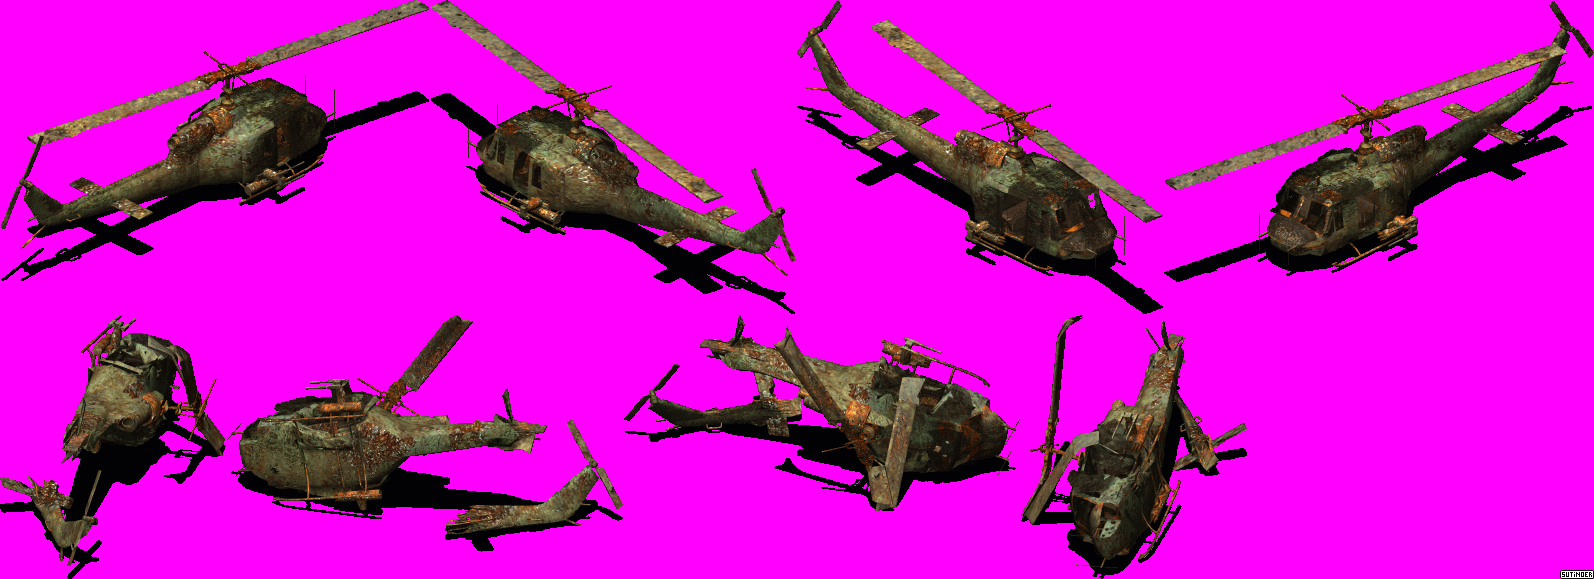 Fallout Tactics: Brotherhood of Steel - Helicopter